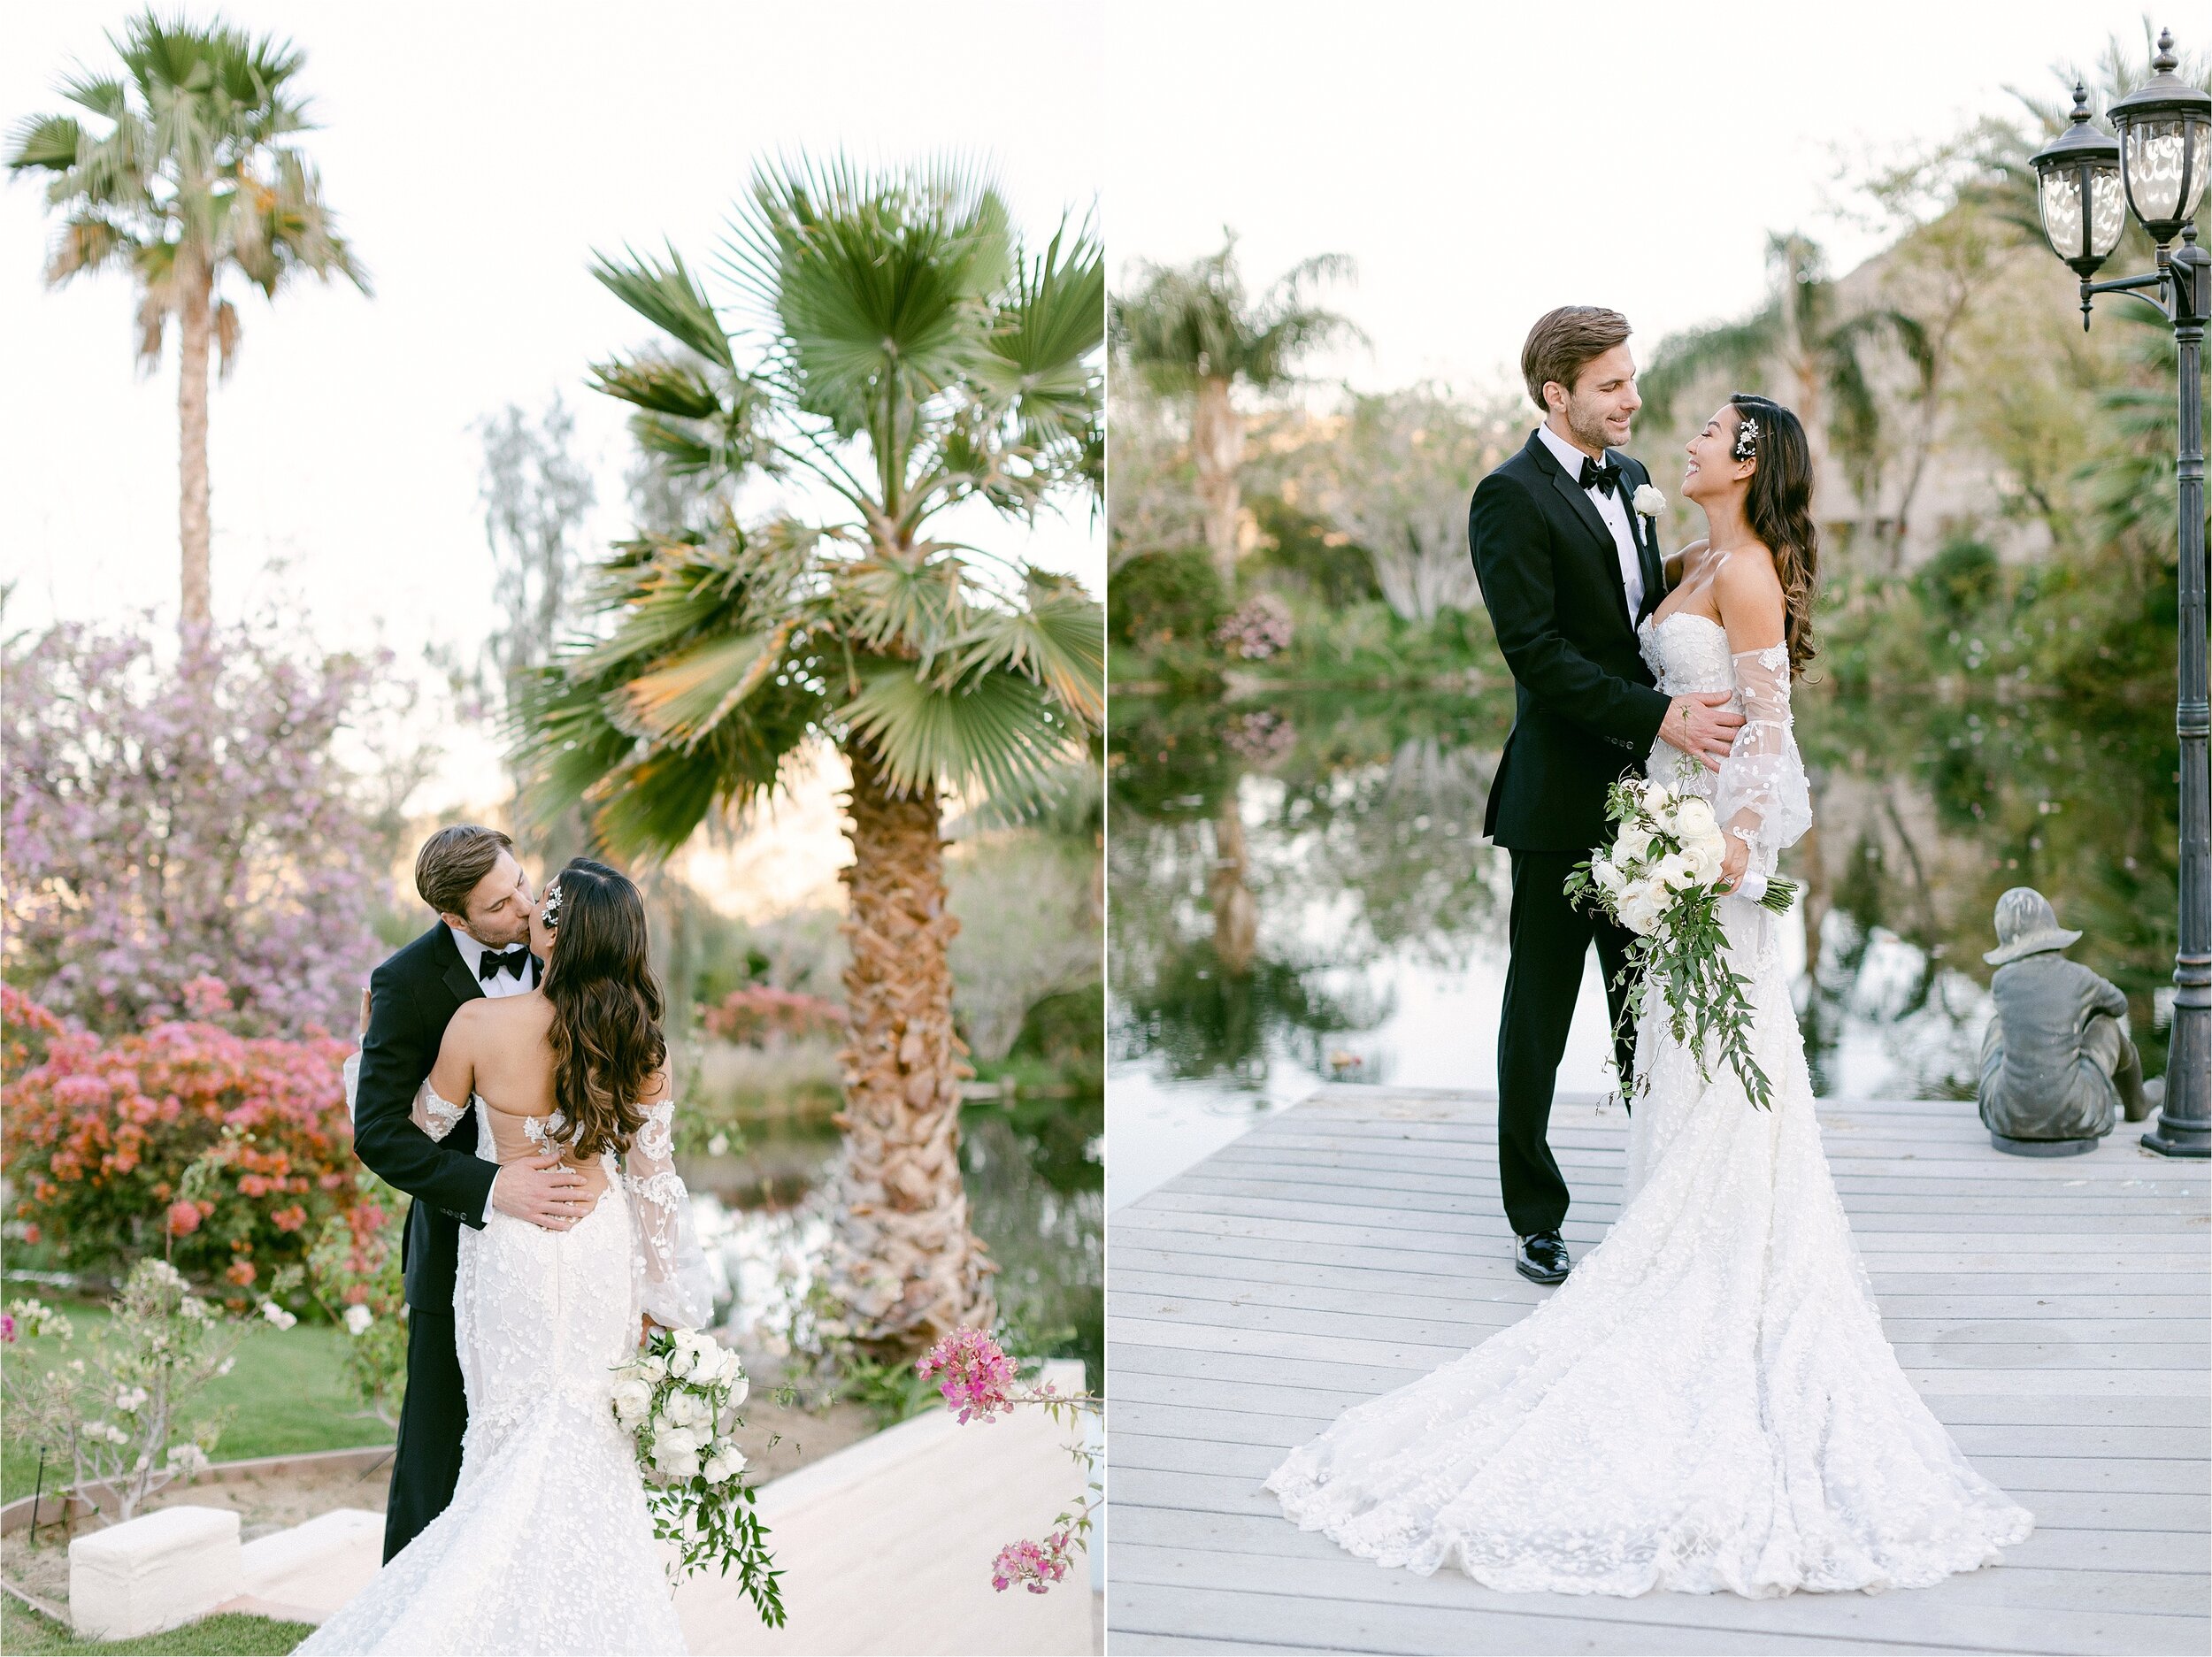 Vibrant Palm Springs destination wedding venue featuring elegant bride and groom surrounded by lush palm trees, pink and purple bougainvillea.